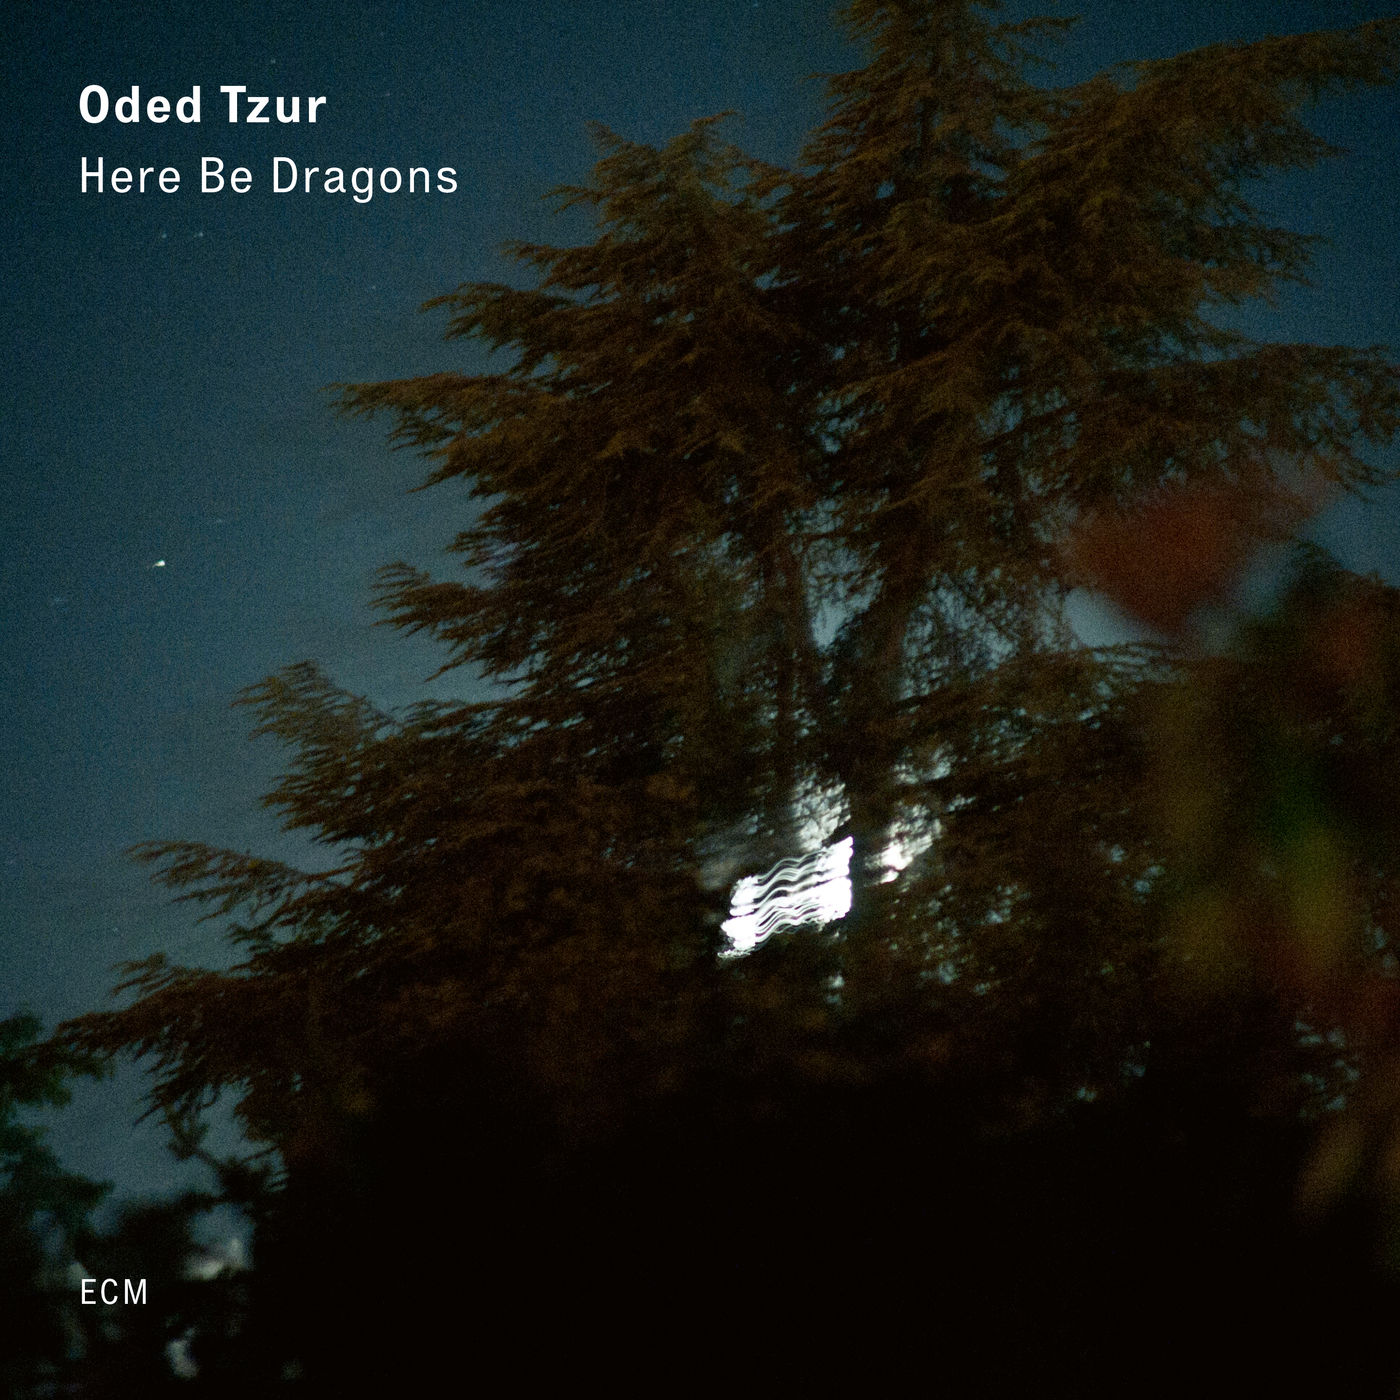 Oded Tzur - Here Be Dragons (2020) [FLAC 24bit/96kHz]